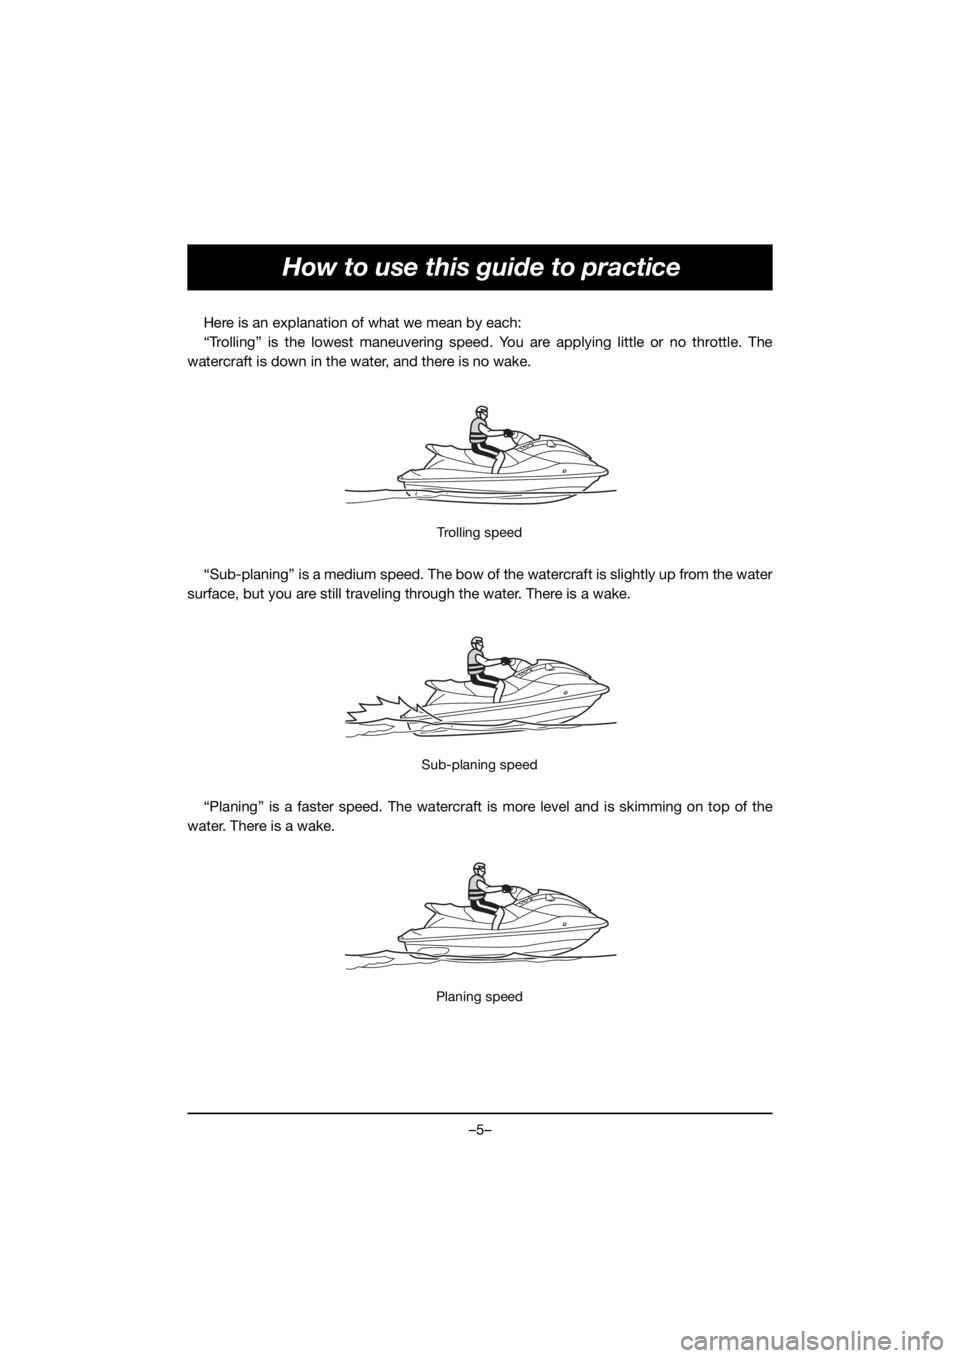 YAMAHA VX DELUXE 2021  Manual de utilização (in Portuguese) –5–
How to use this guide to practice
Here is an explanation of what we mean by each:
“Trolling” is the lowest maneuvering speed. You are applying little or no throttle. The
watercraft is down